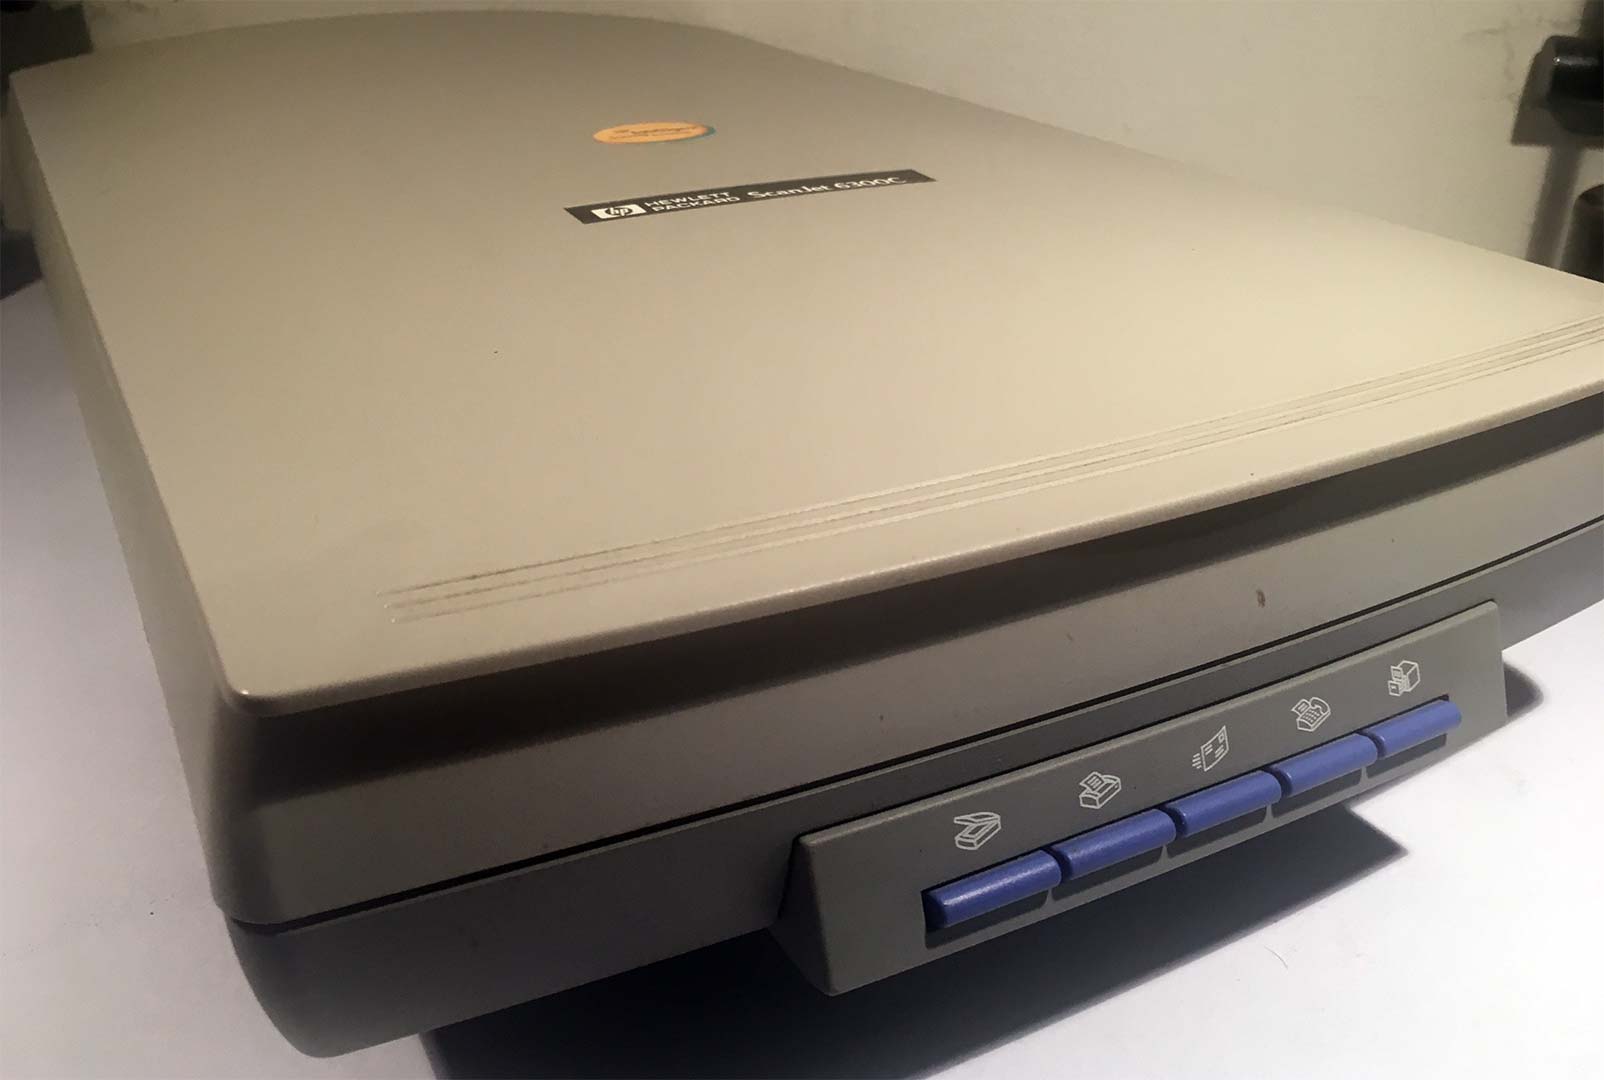 Picture of the HP6300 scanner